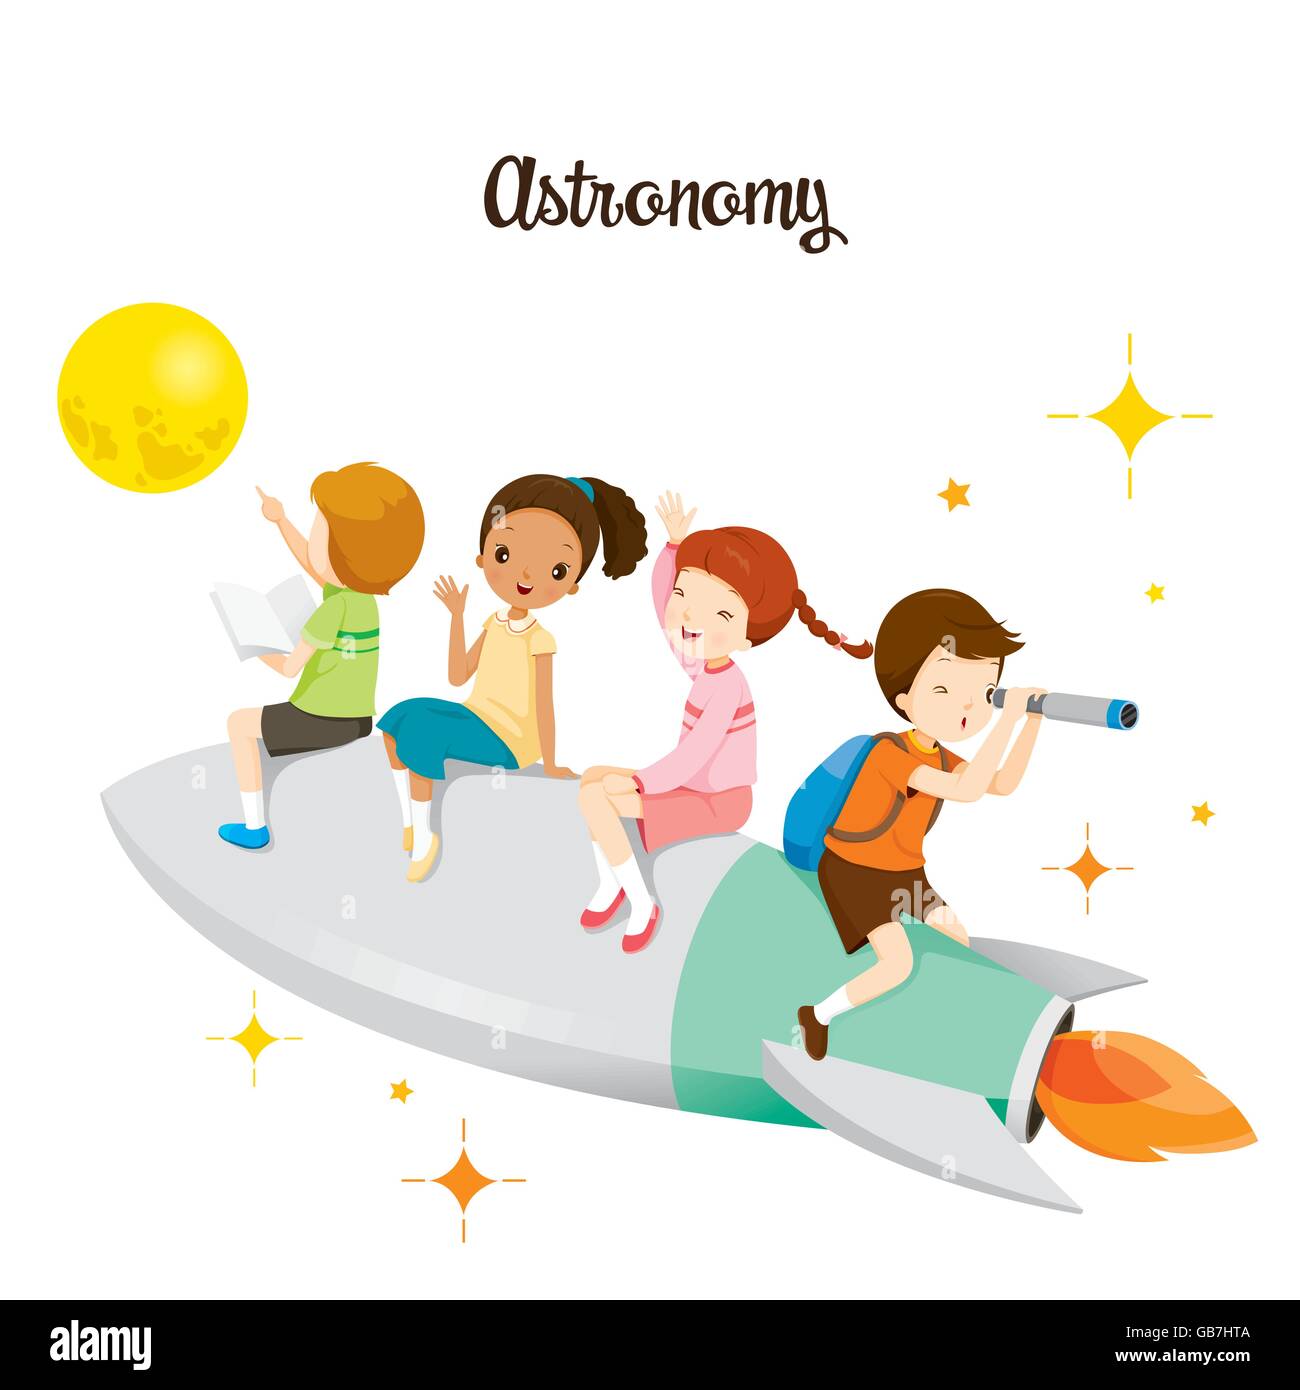 Children Sitting On Rocket, Going To The Moon, Back to school, Educational, Stationery, Book, Subjects, Knowledge, Teaching Aid Stock Vector